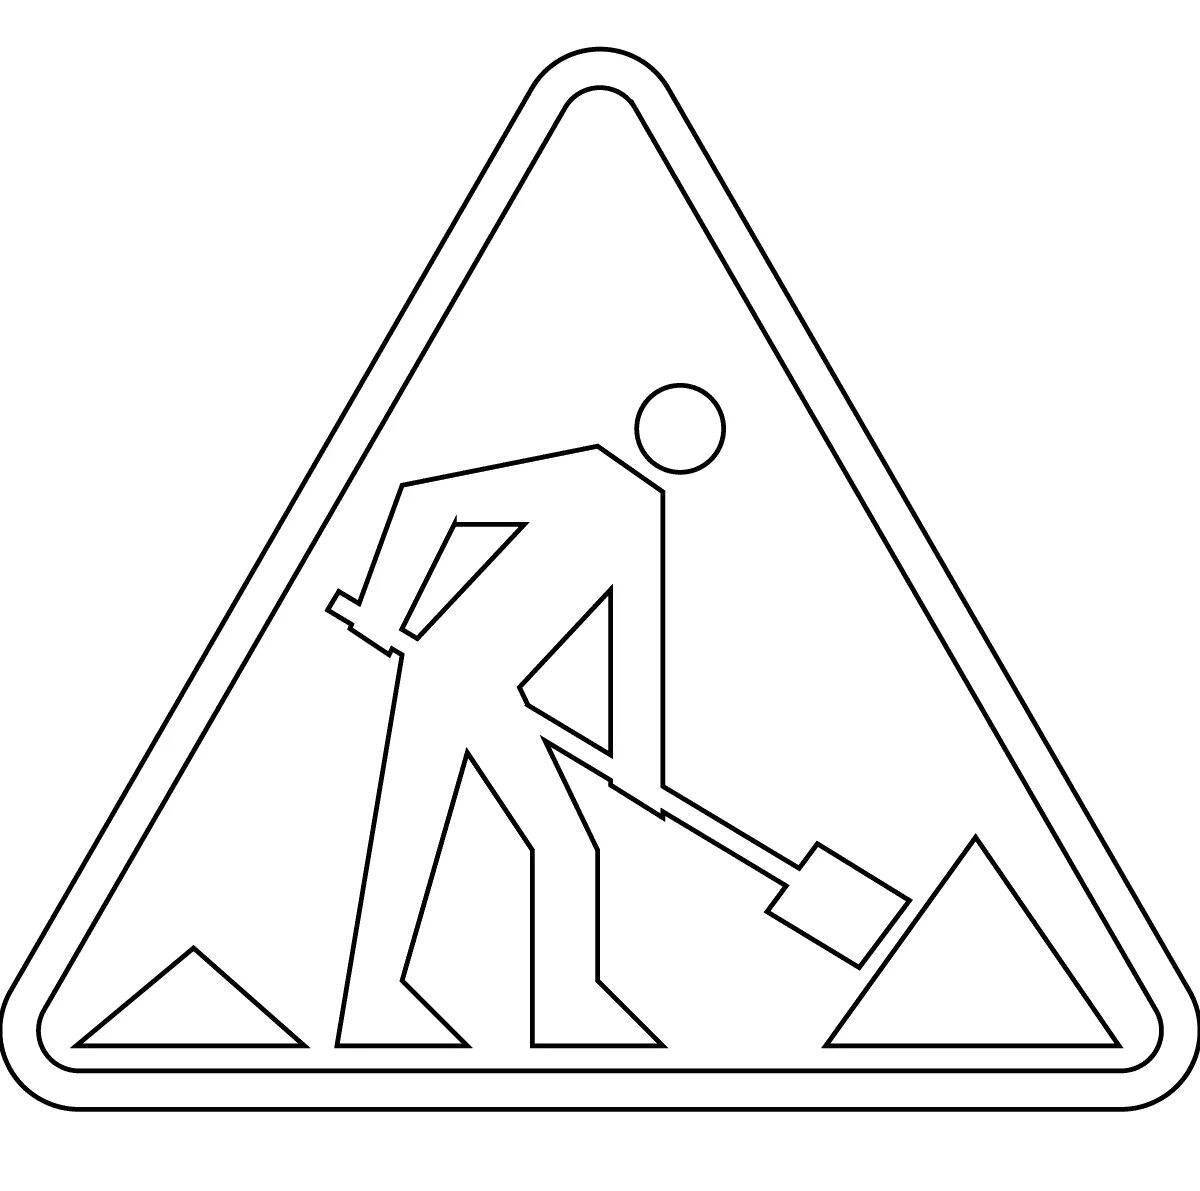 Coloring page graceful road signs